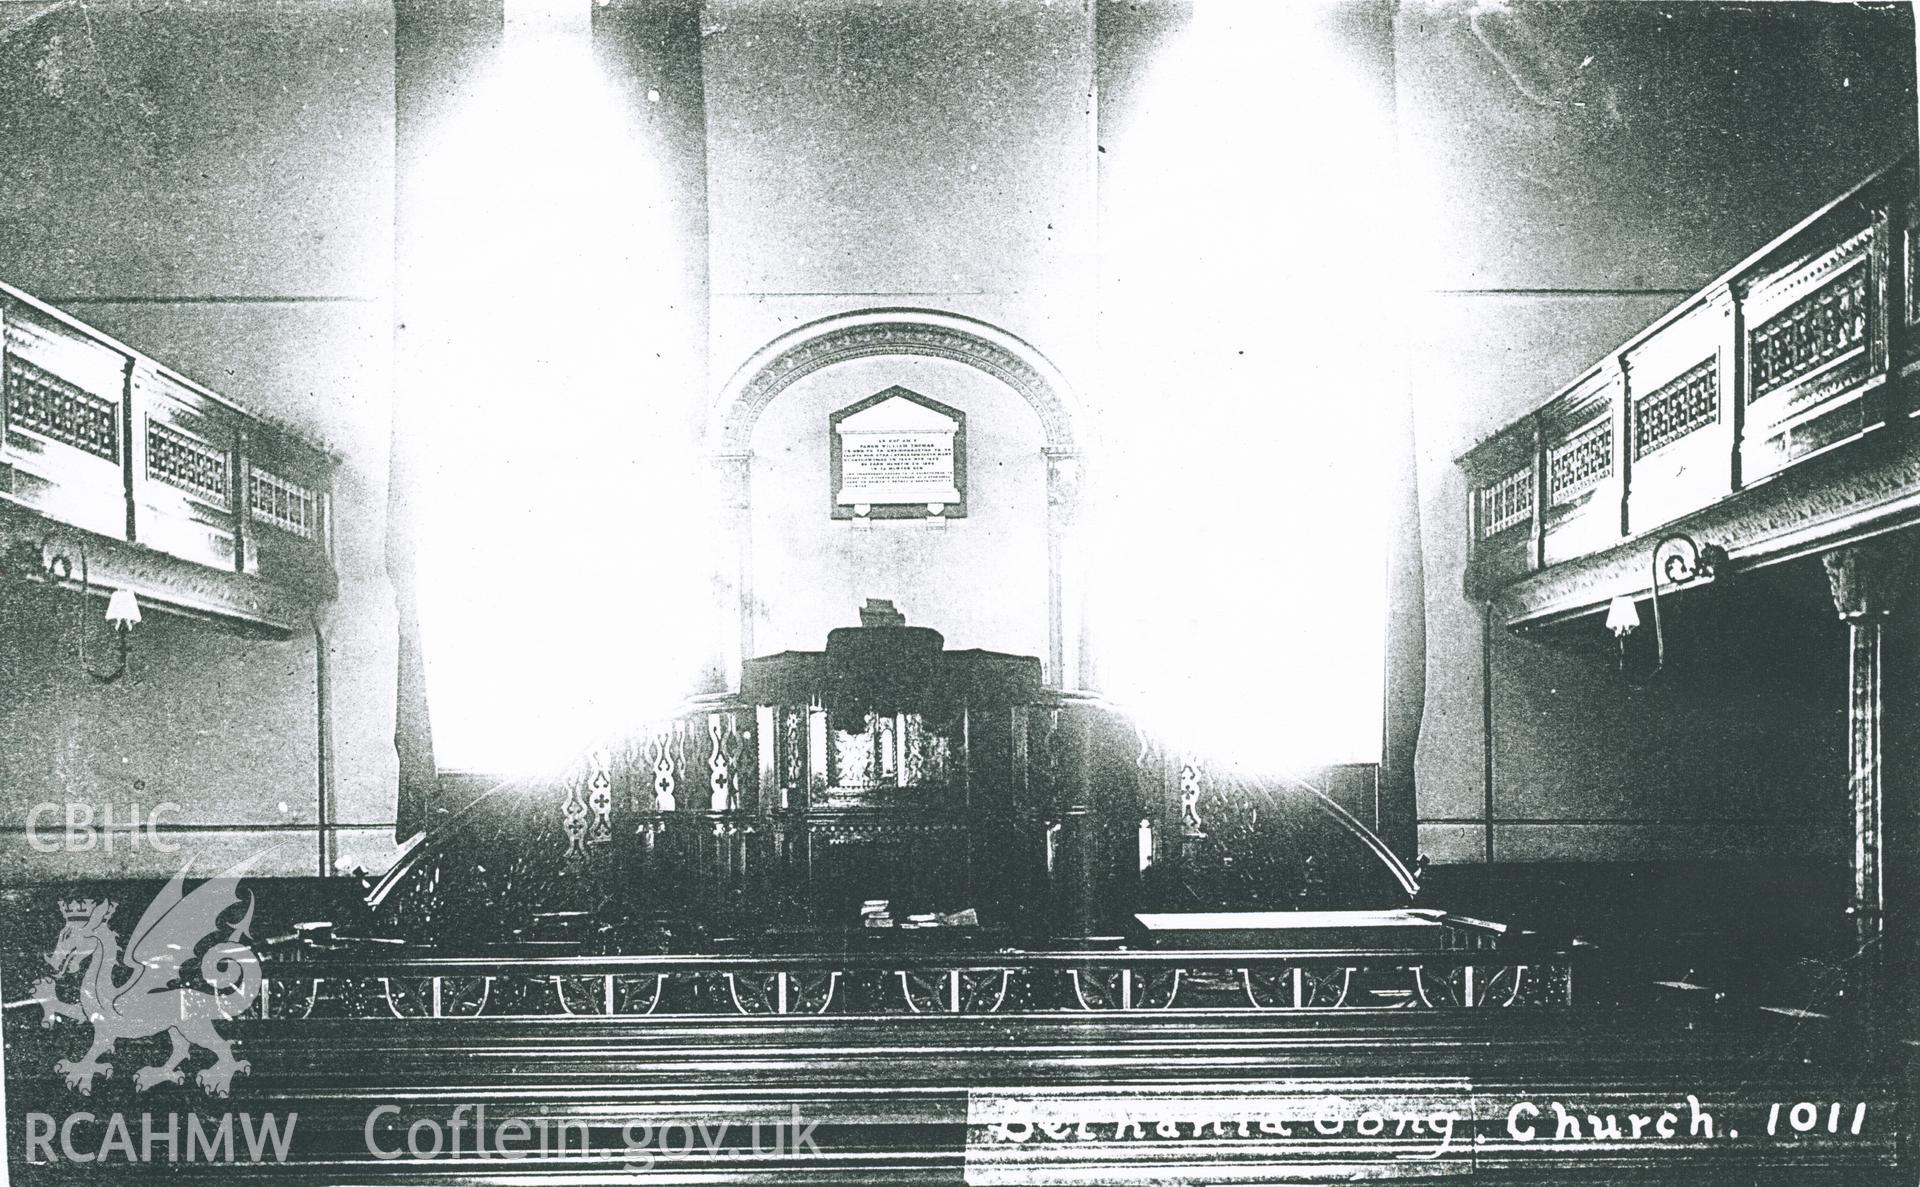 Black and white photograph showing interior of Bethania Chapel, circa 1911. Donated to the RCAHMW by Cyril Philips as part of the Digital Dissent Project.